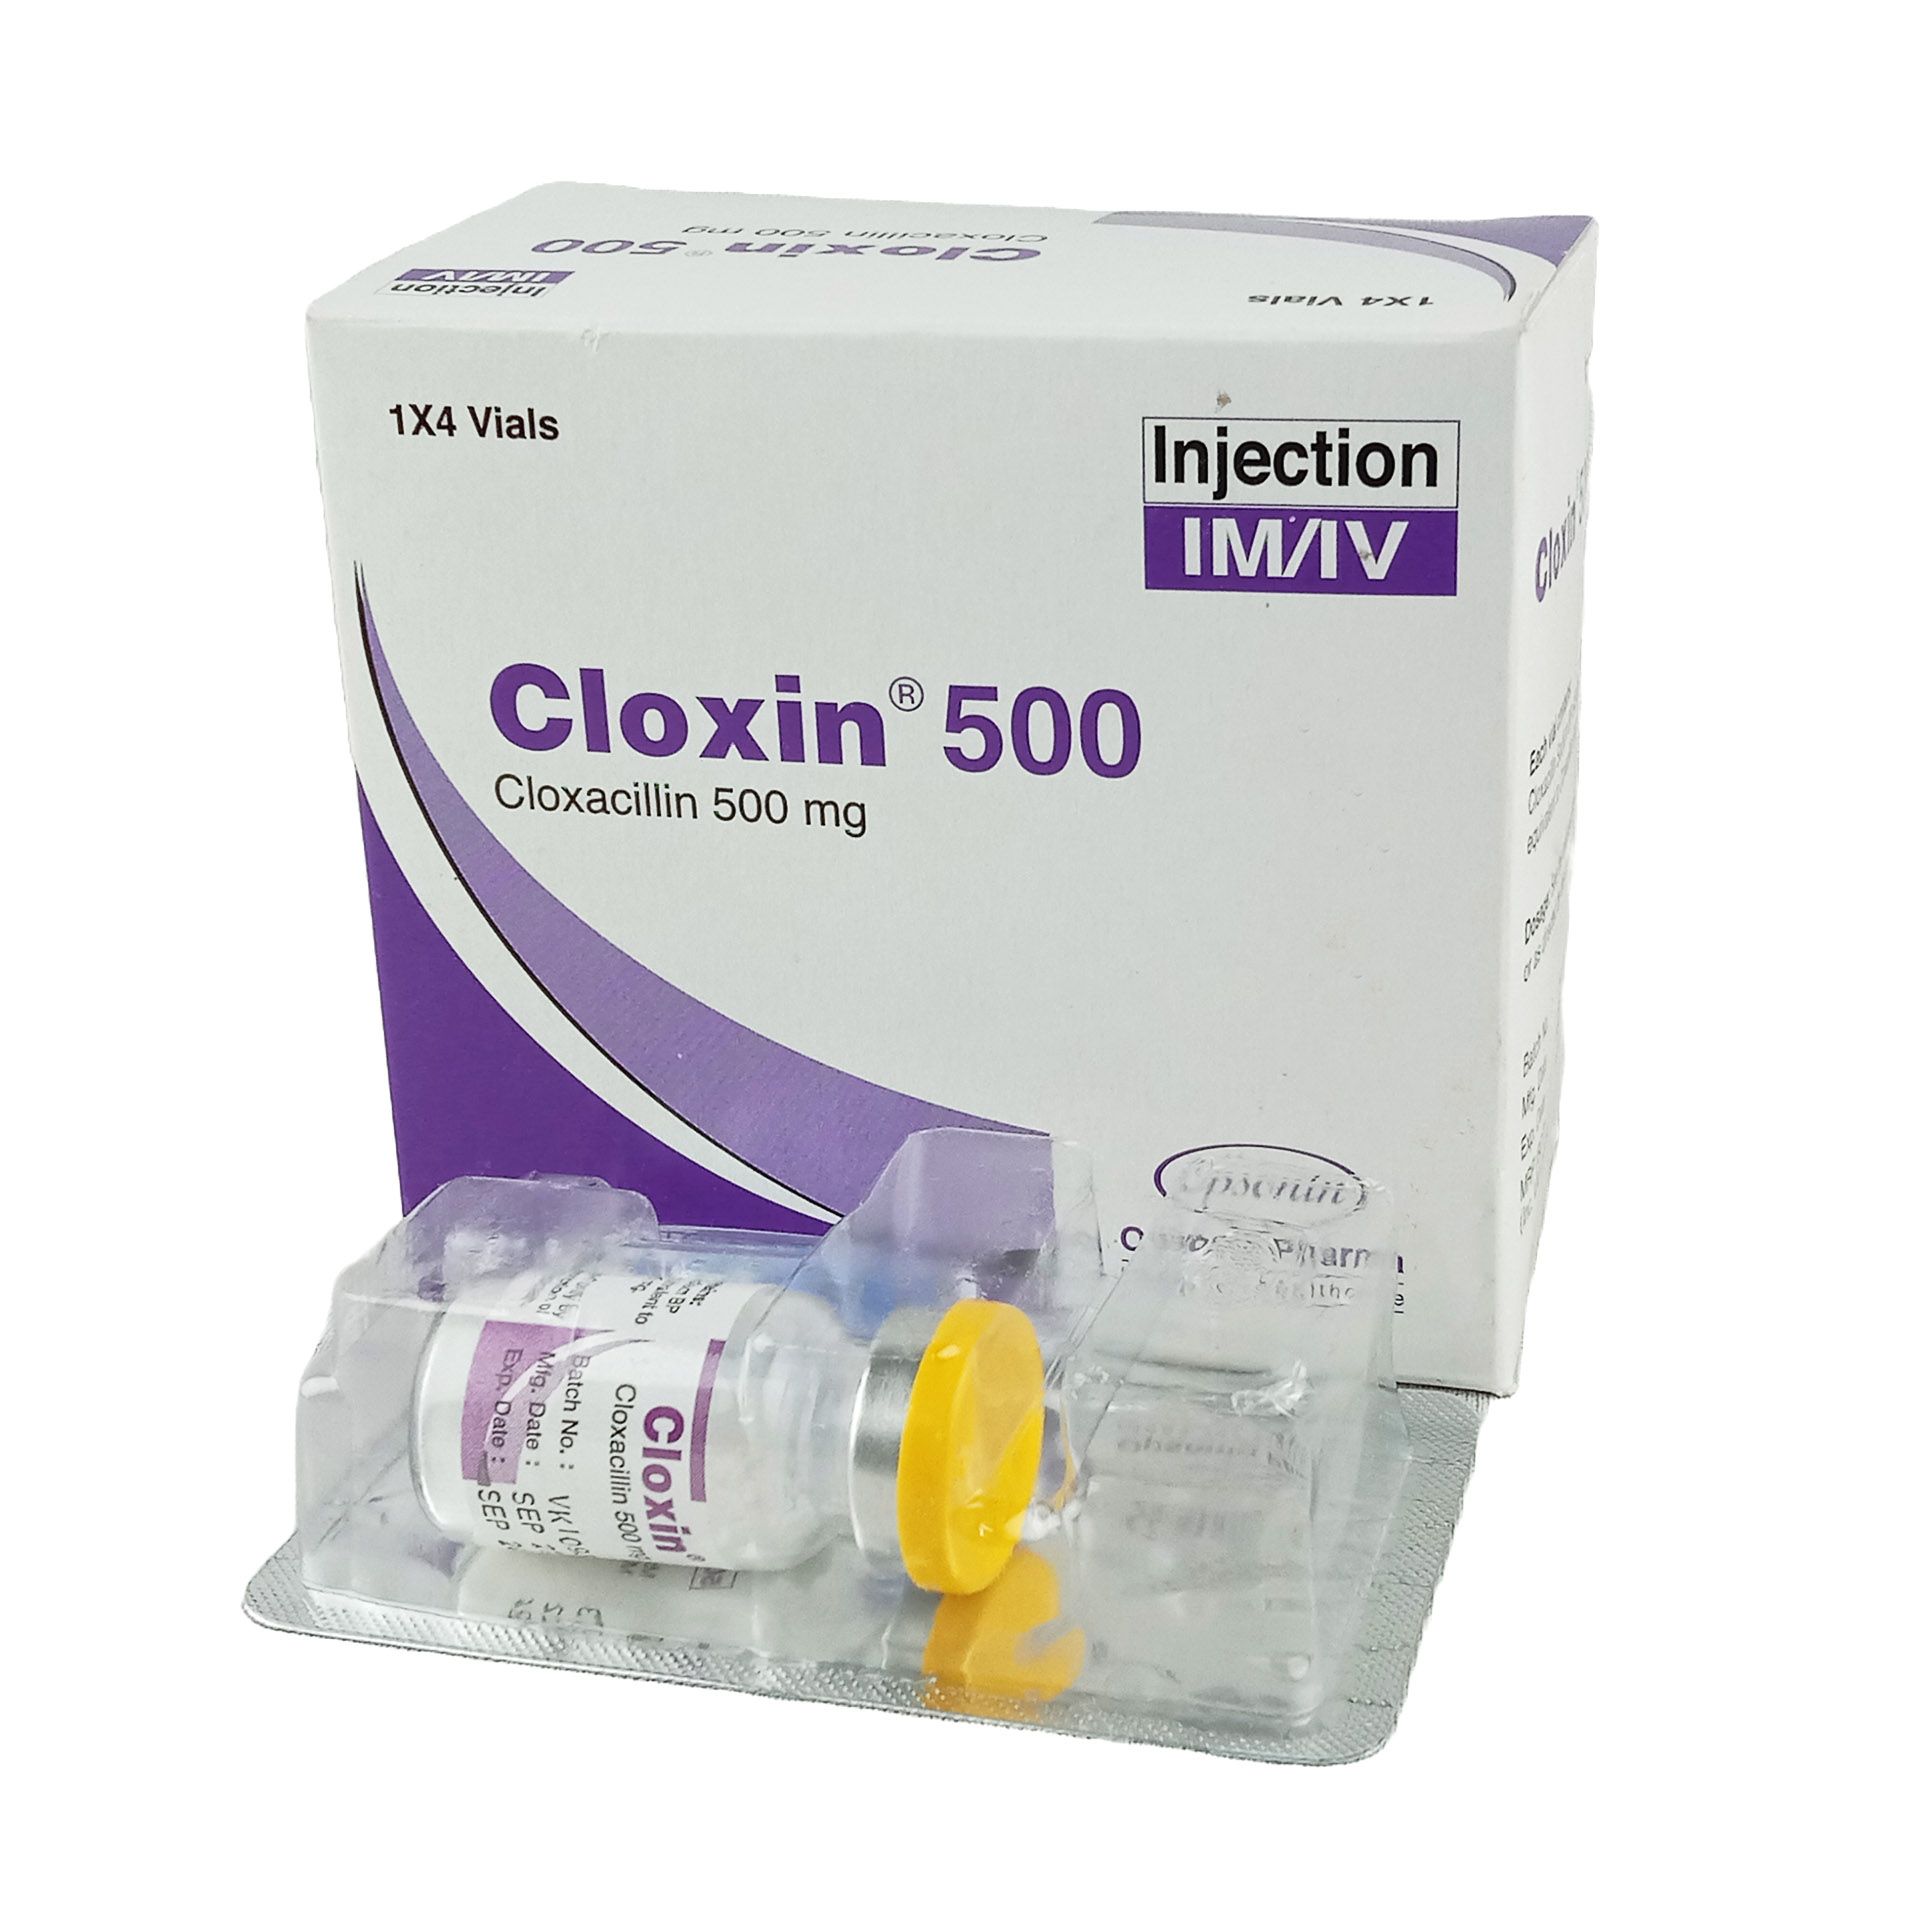 Cloxin 500mg/vial Injection